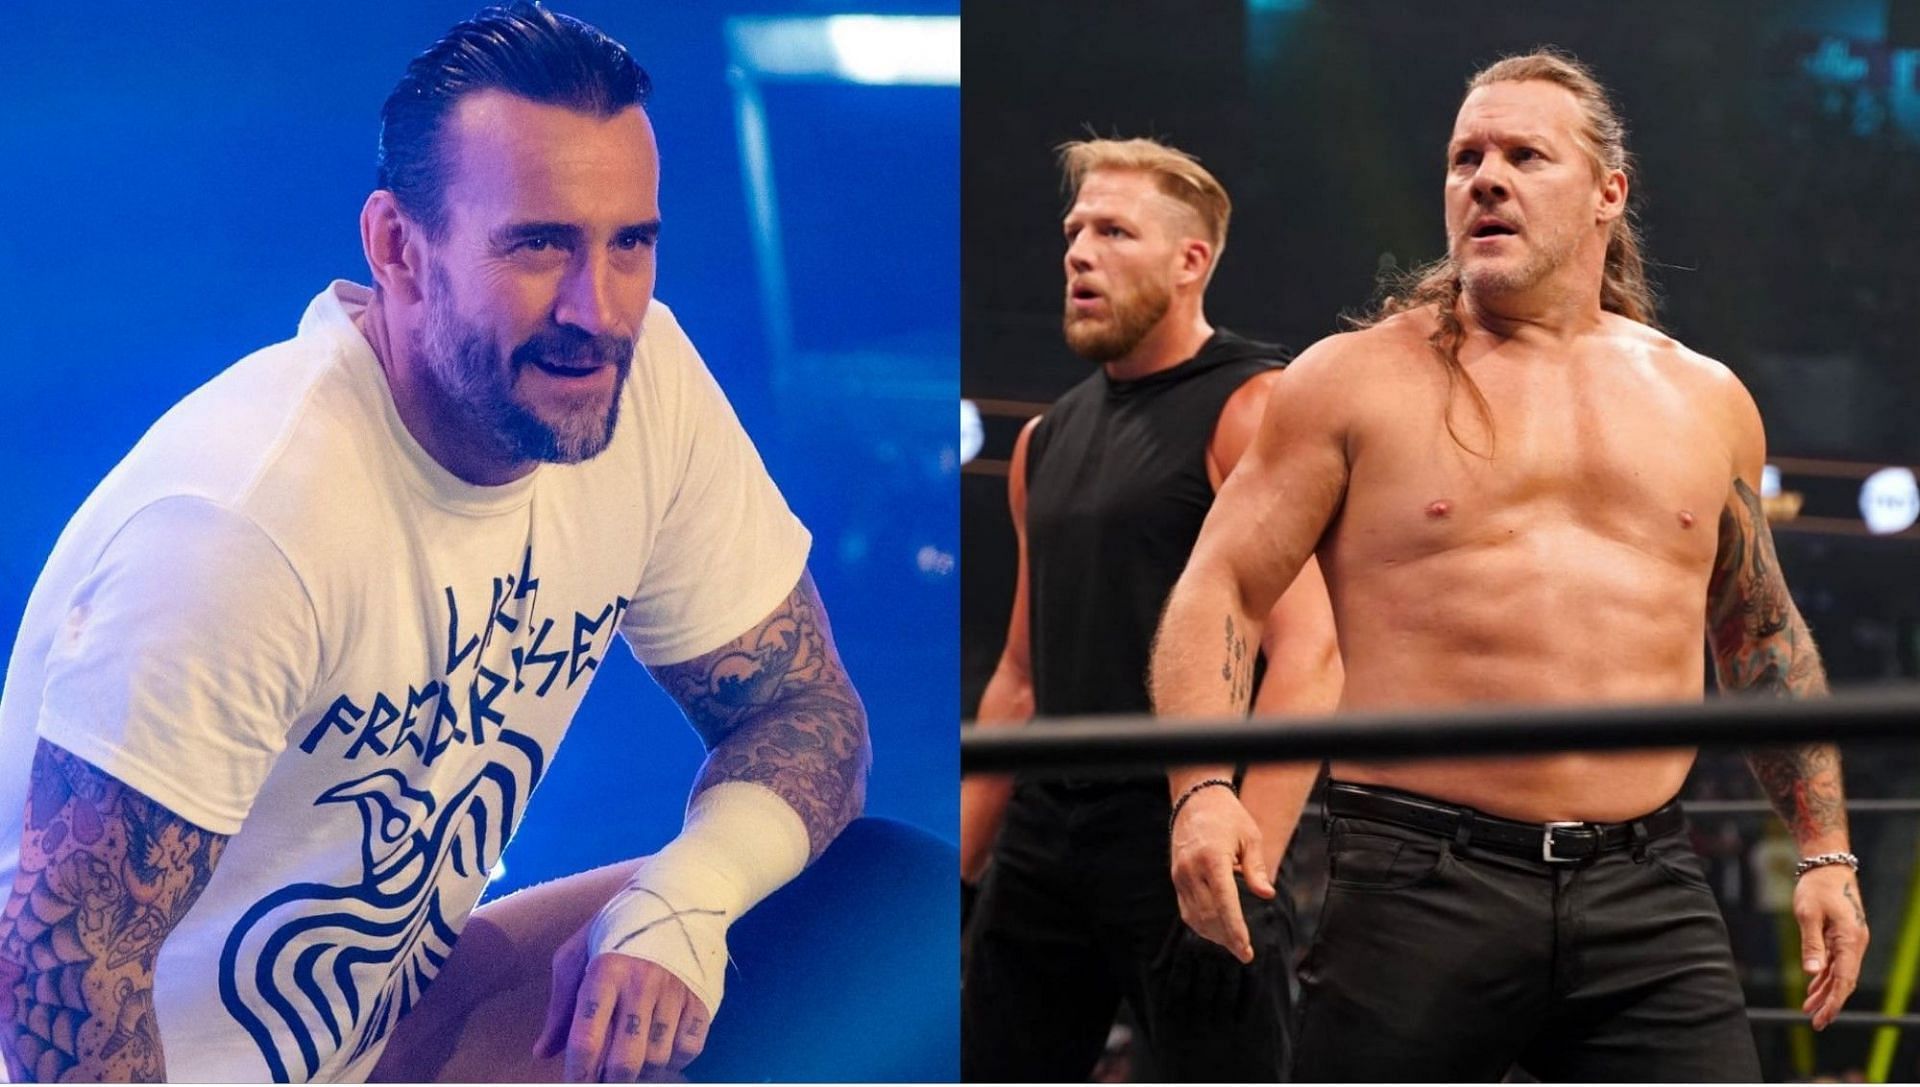 What could be in store for us on AEW Dynamite this week?